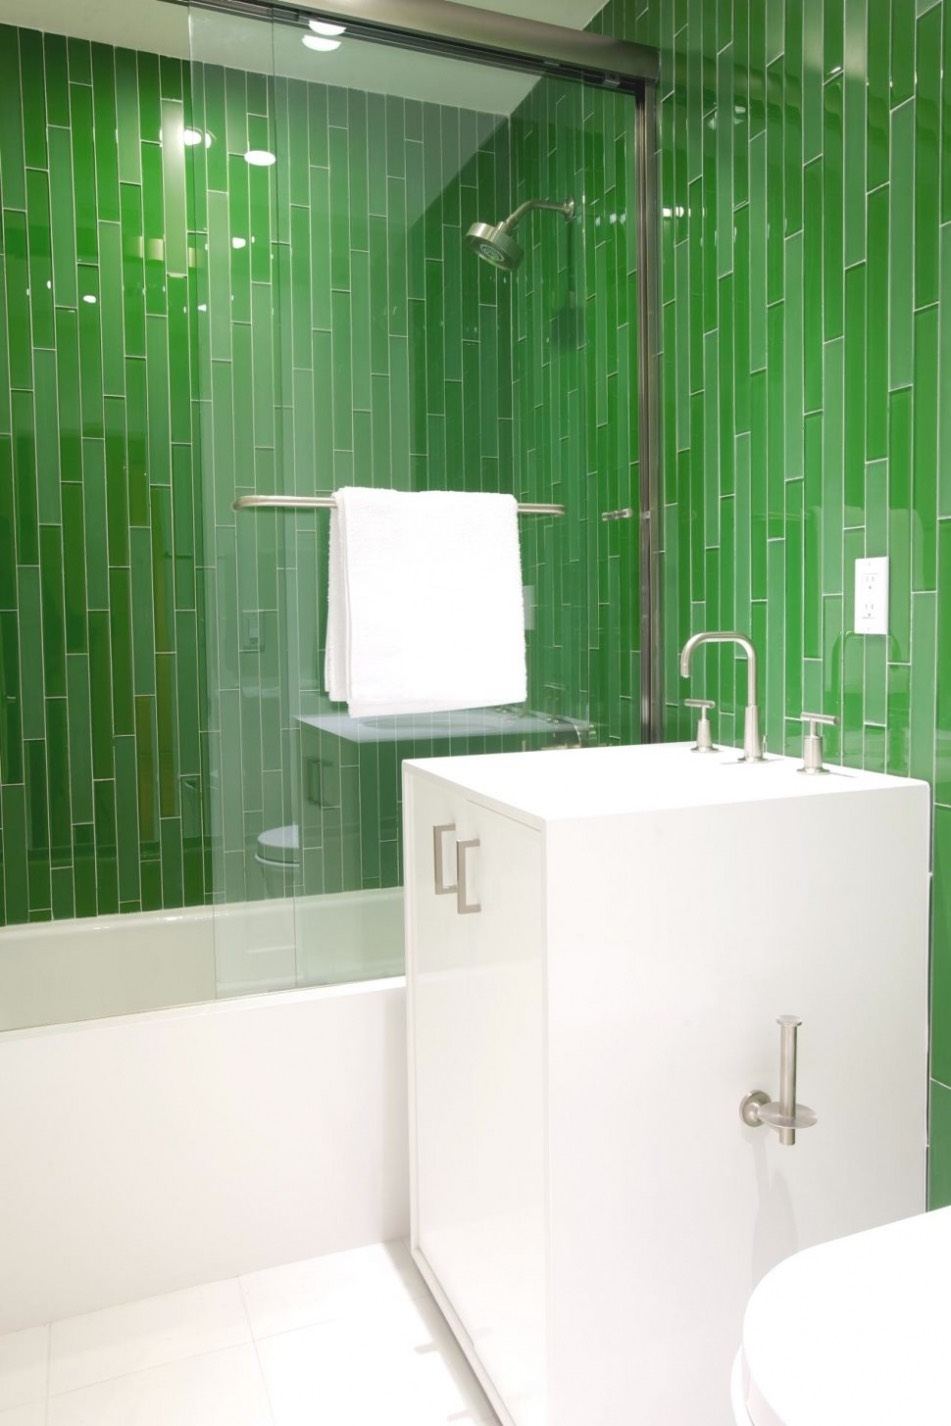 Long, thin green tiles in a vertical pattern around a white bathtub and vanity